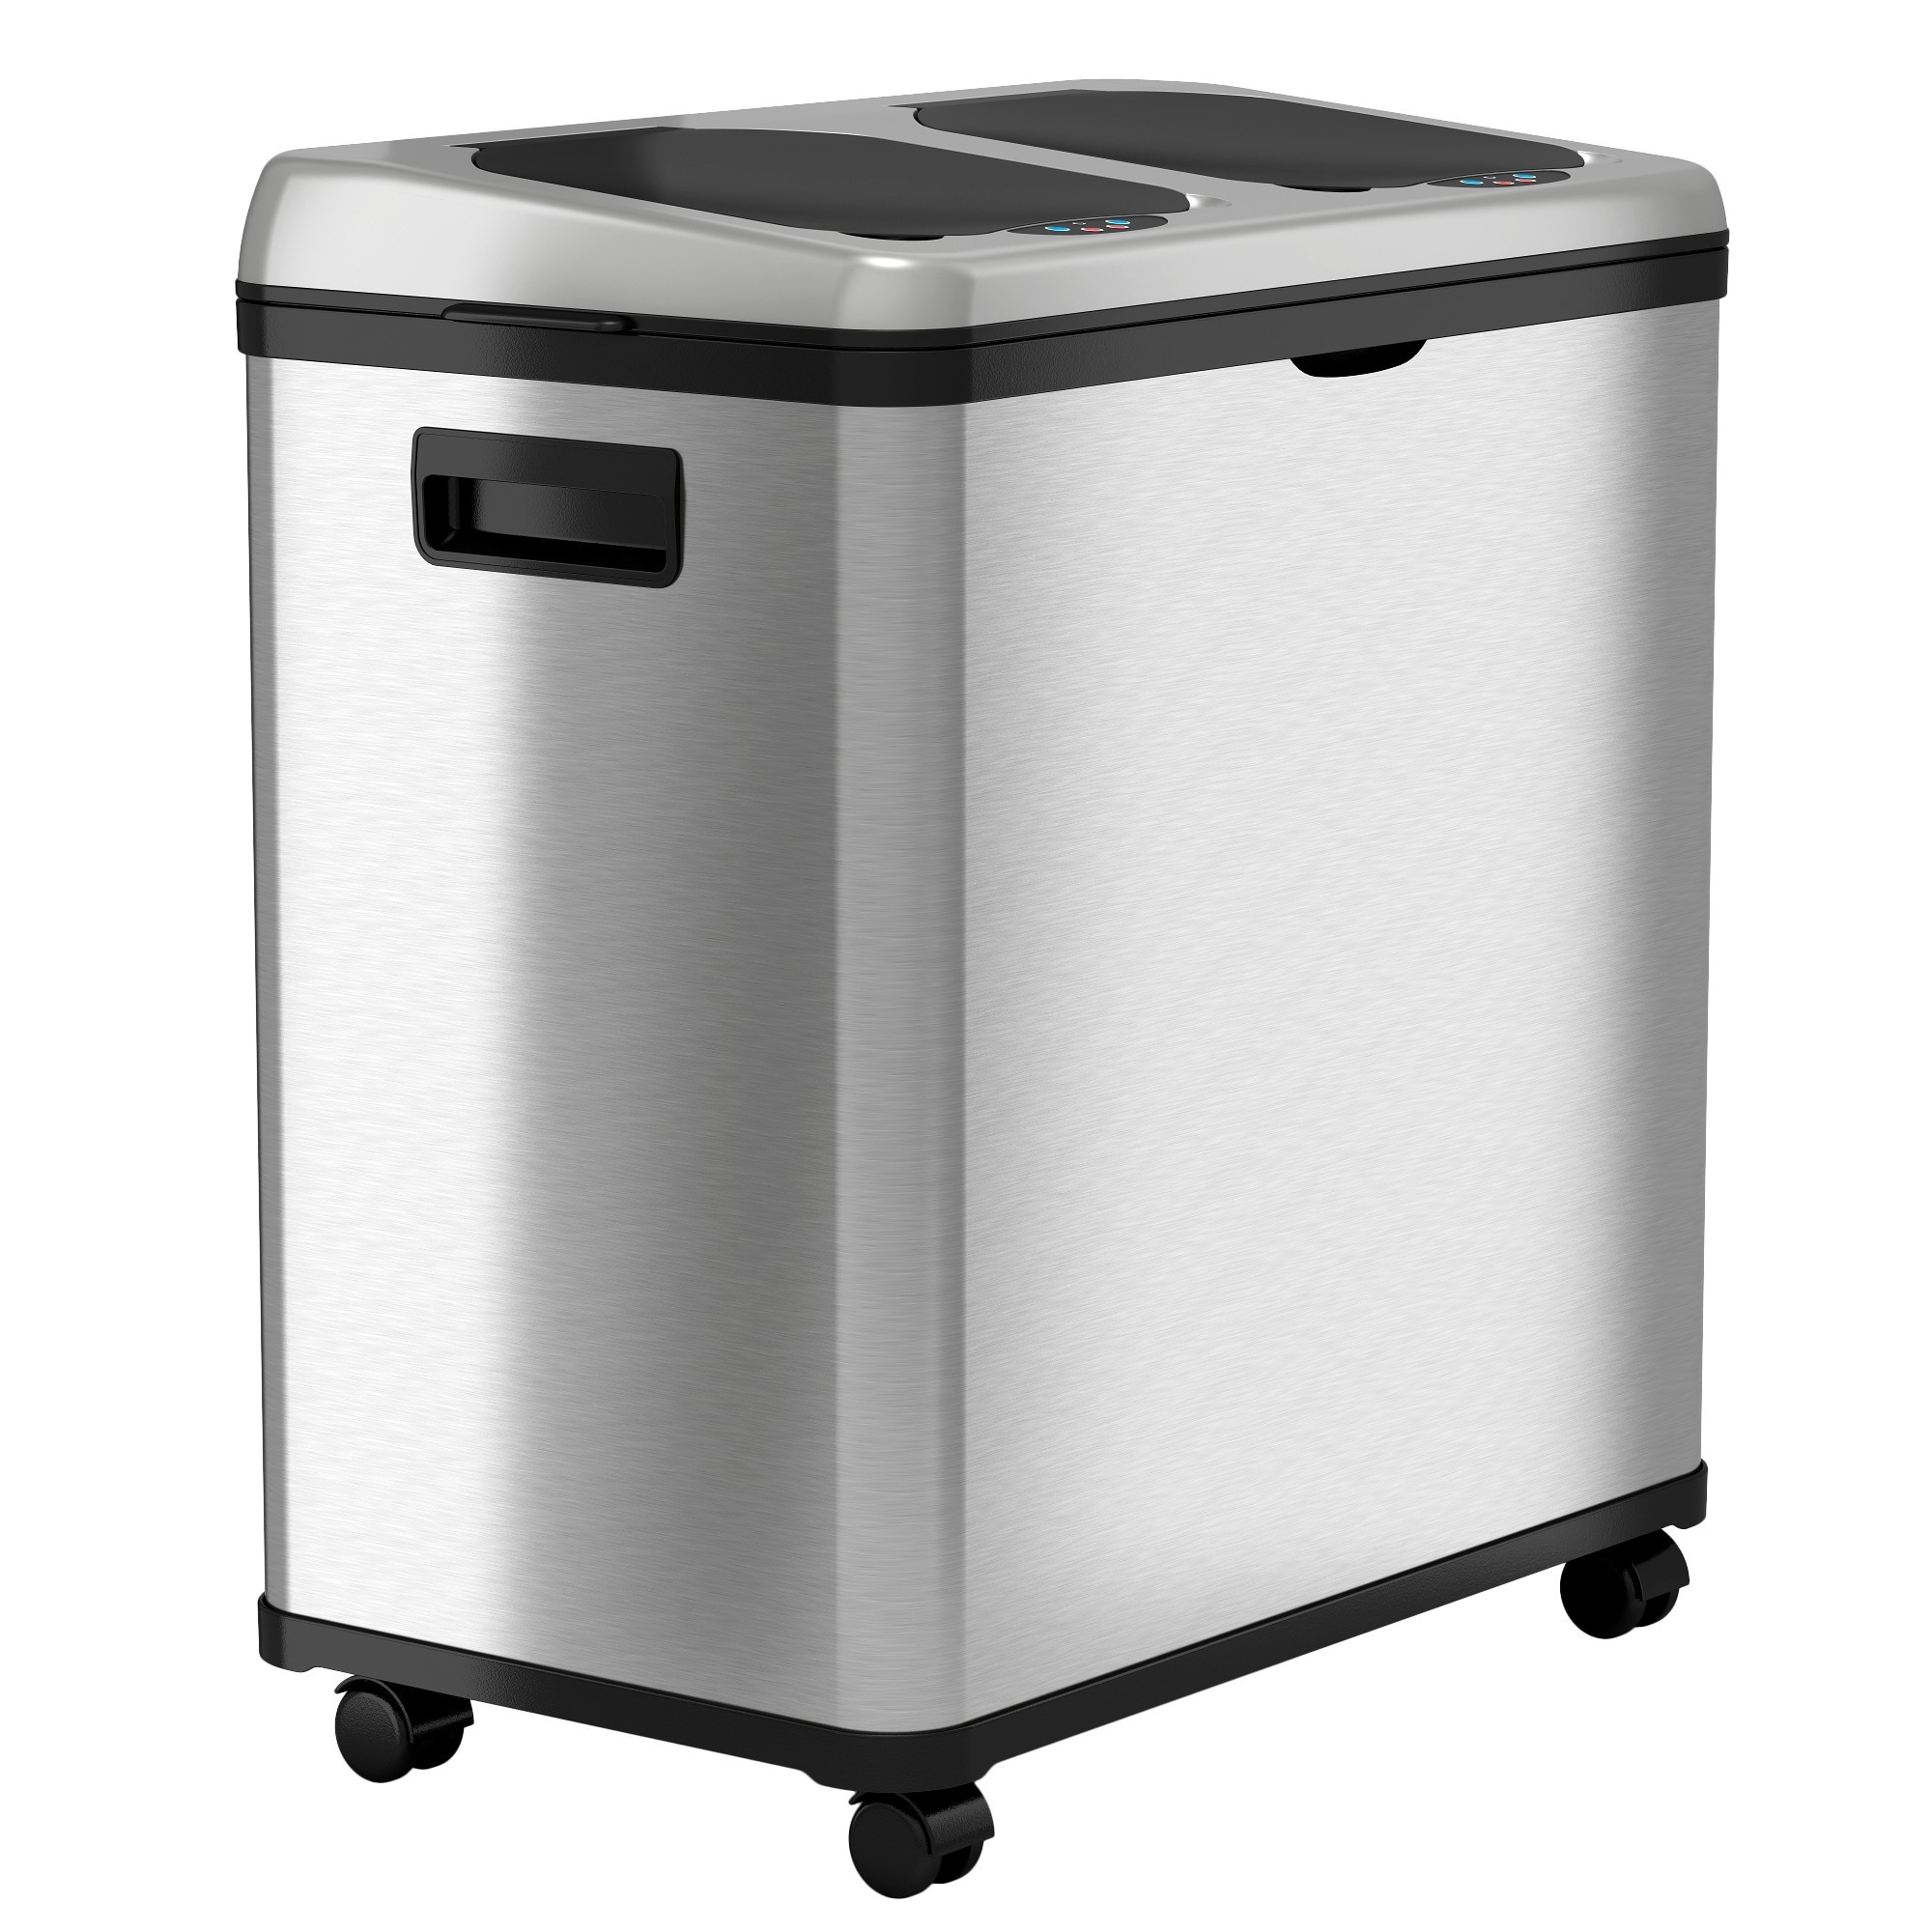 https://ak1.ostkcdn.com/images/products/4274128/iTouchless-Stainless-Steel-Trash-Can-Recycler-Automatic-Sensor-Touchless-Lid-Dual-Compartment-8-Gal-each-16-Gal-dd2090bc-fd25-4a96-b8af-39b8a2d5e5d8.jpg